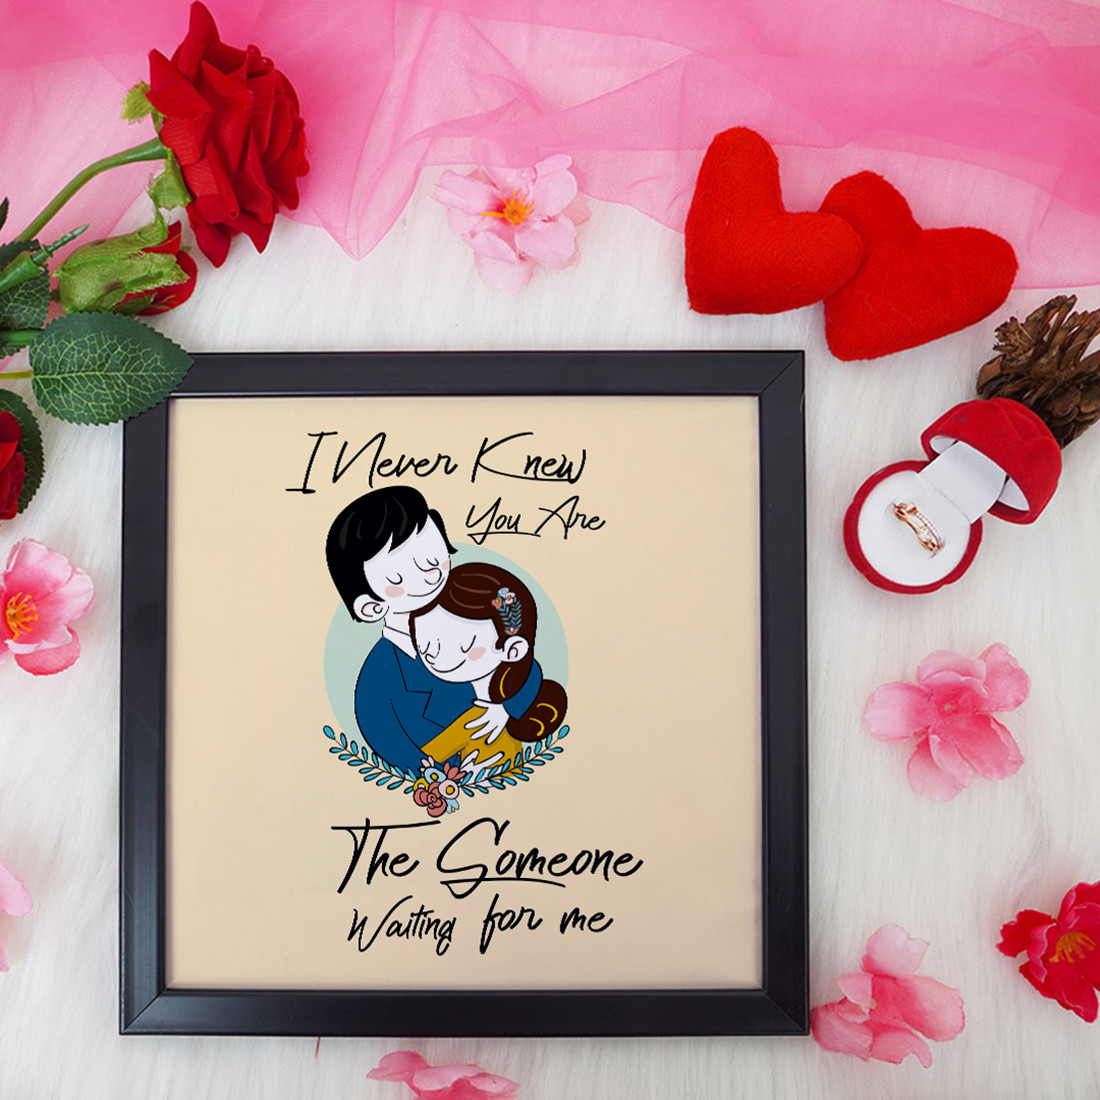 I Never Know Valentine Gift Set | Valentine's Day Gifts for Girlfriend | Valentine Gift for Wife | Ring for Women/Girl | Photo Frame (8x8 Inches)